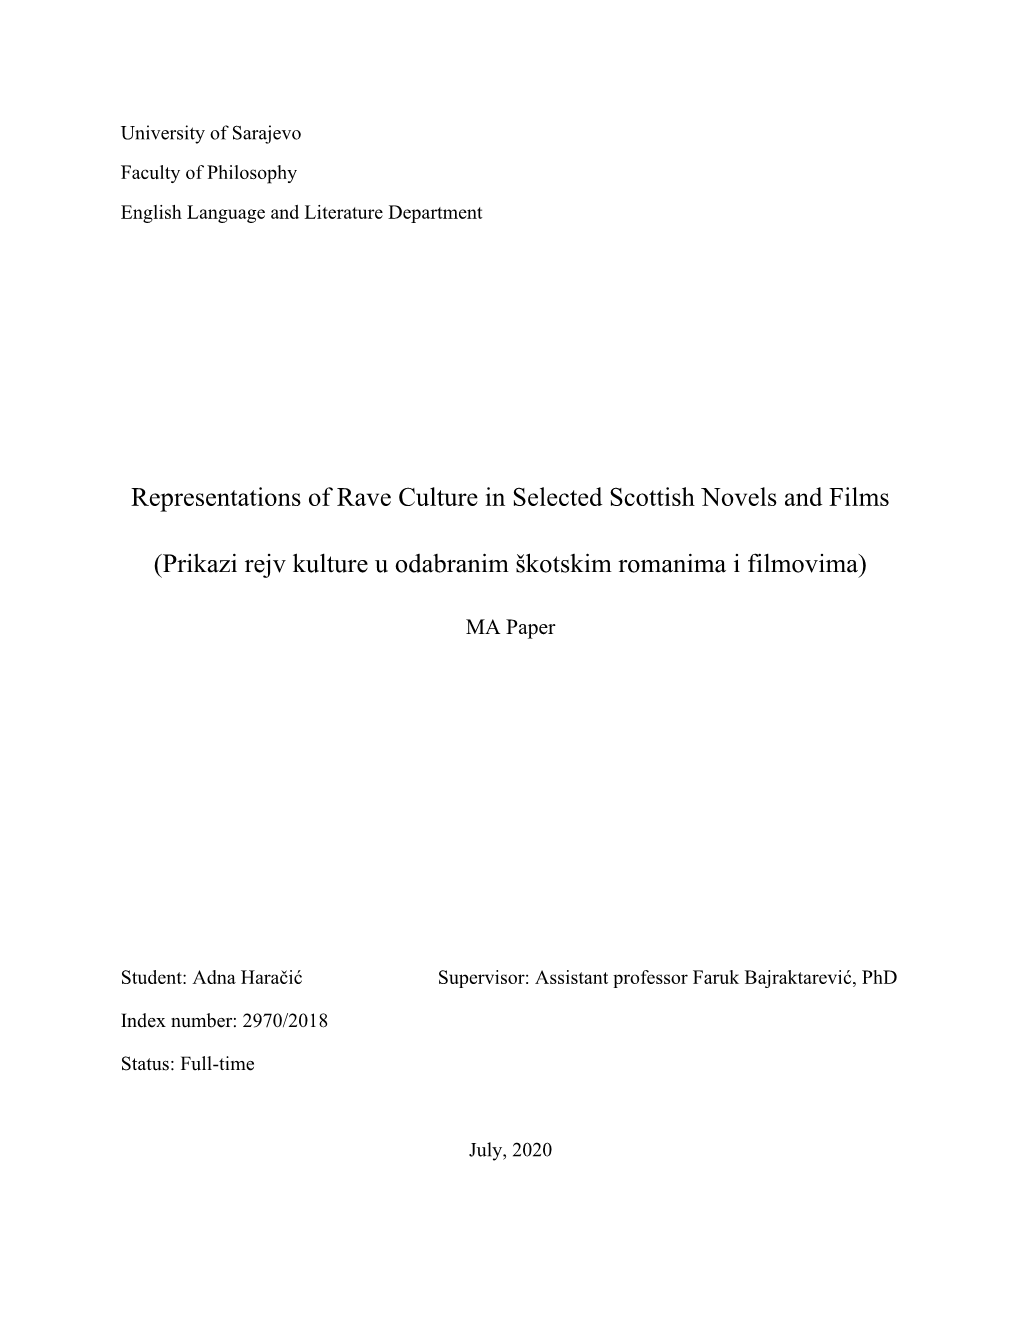 Representations of Rave Culture in Selected Scottish Novels and Films